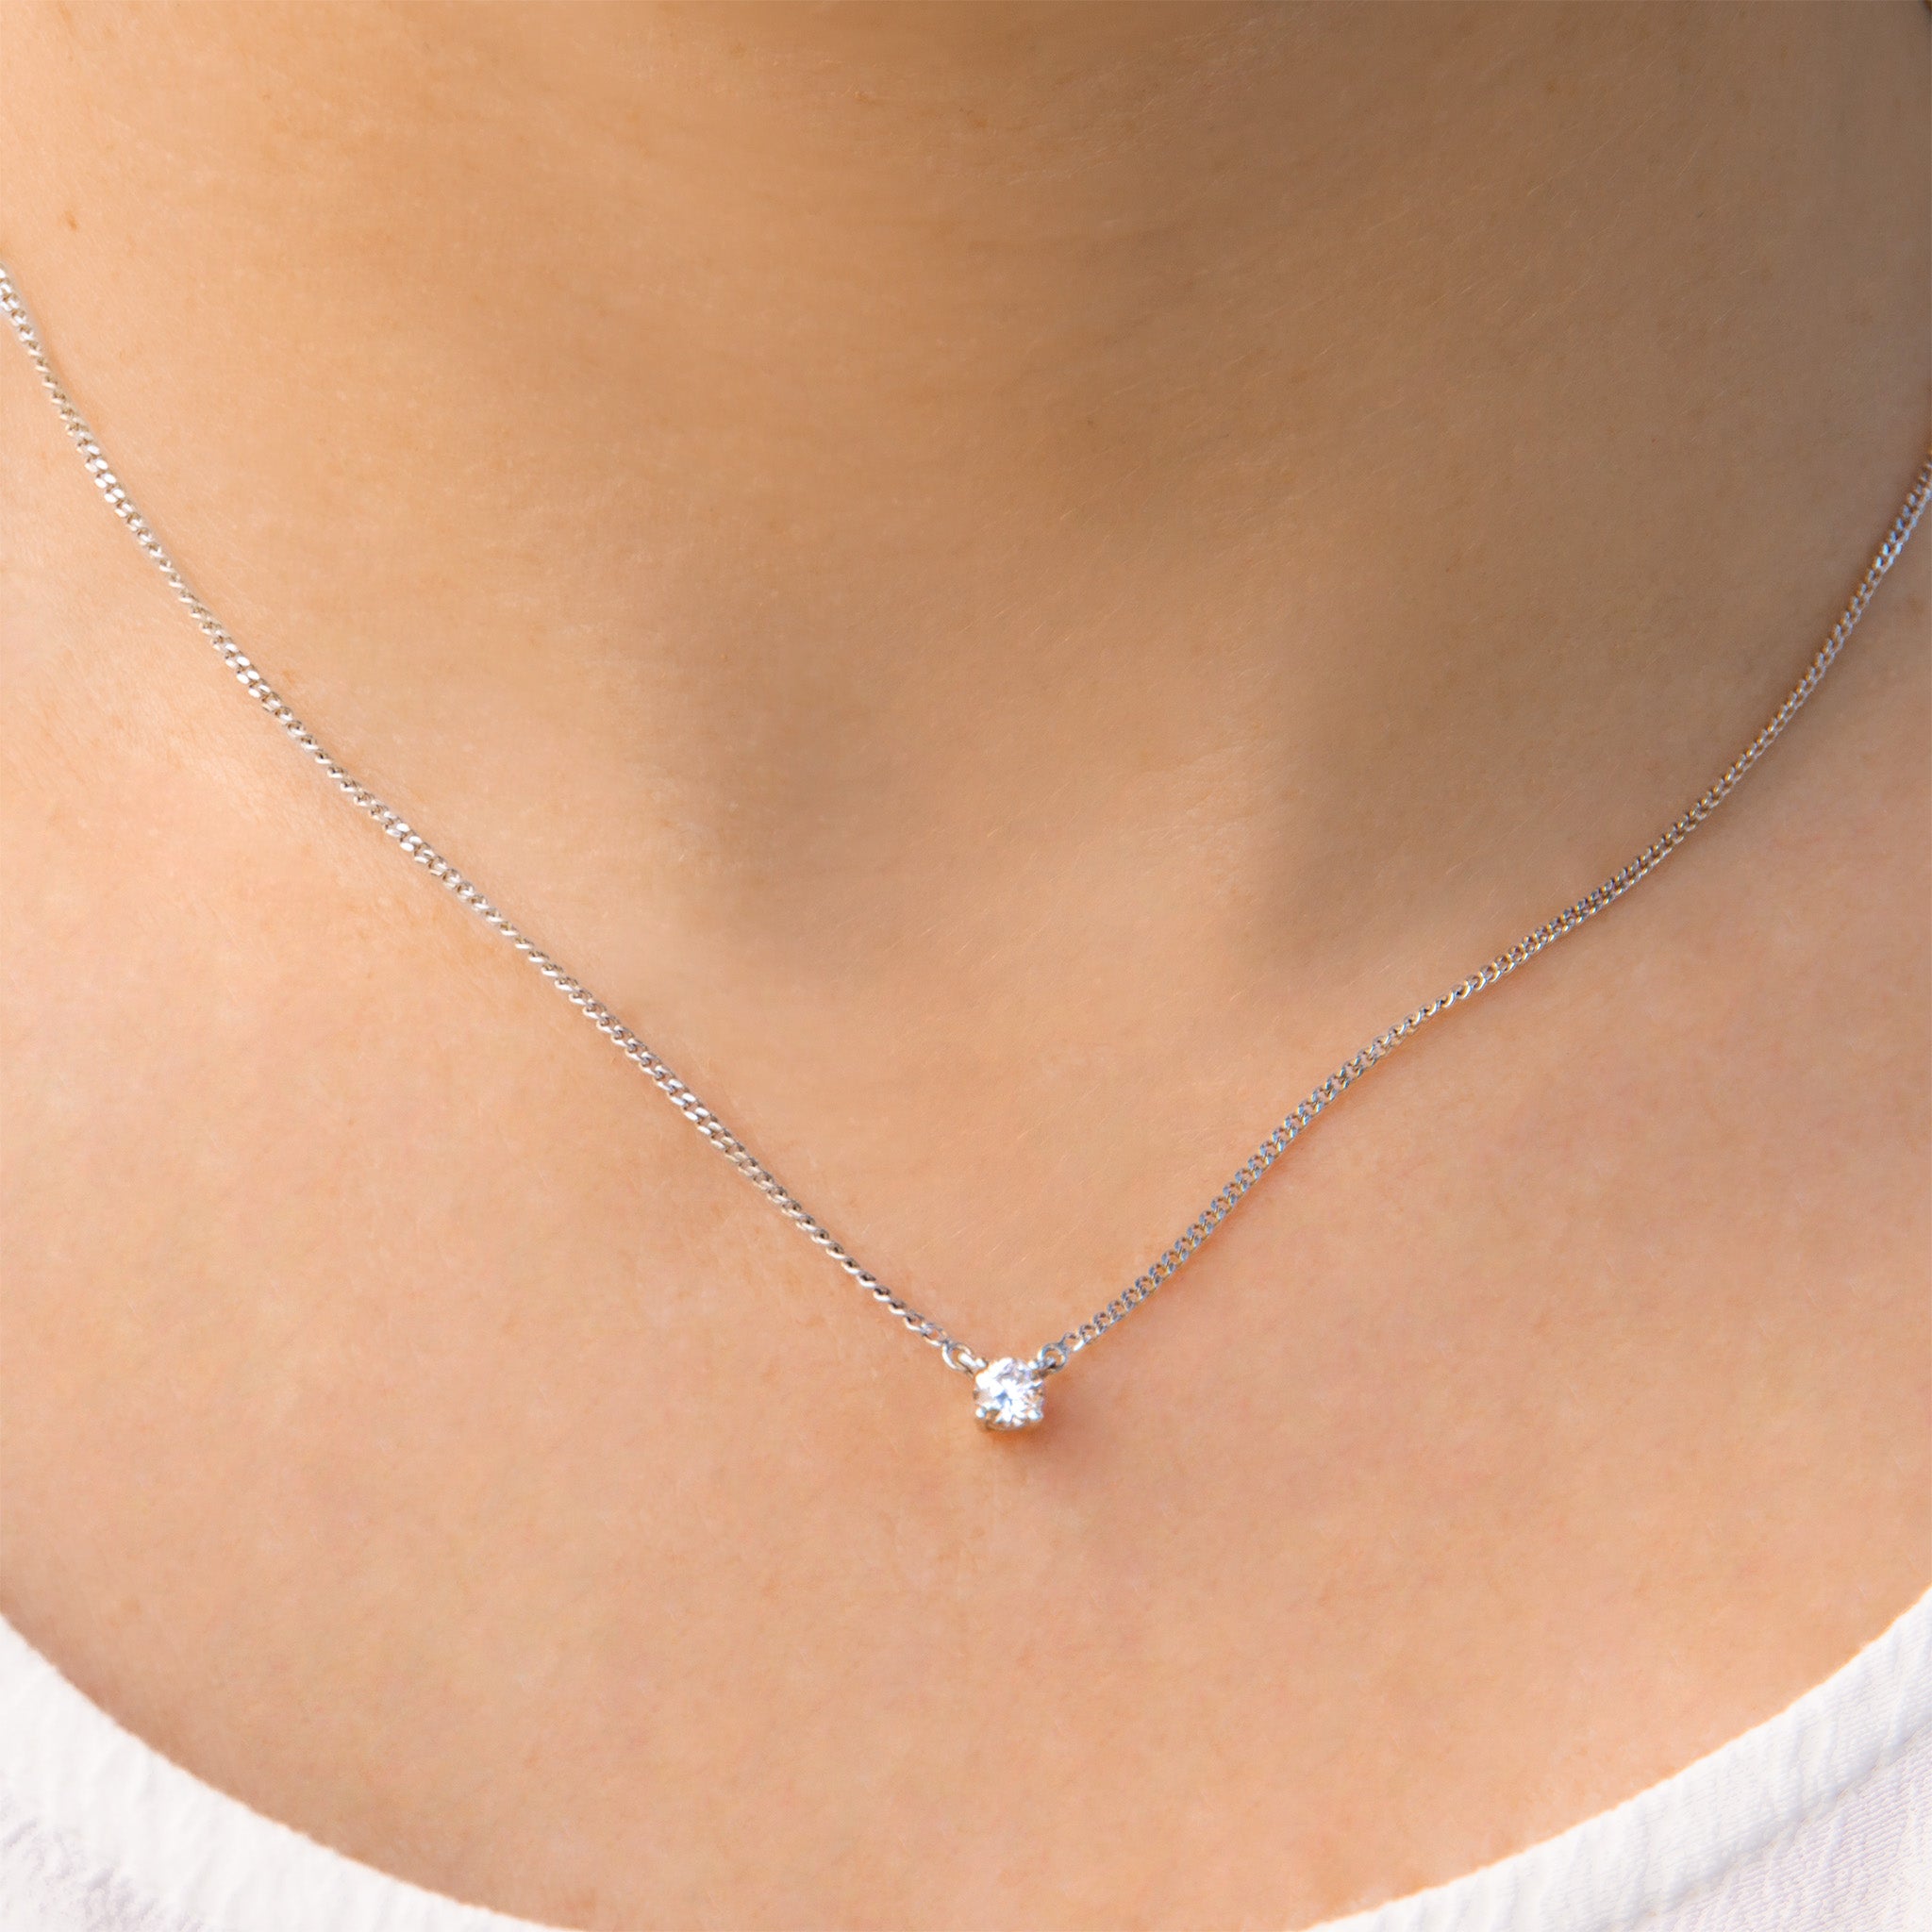 White gold lab diamond solitaire necklace AIANA jewellery made in Australia